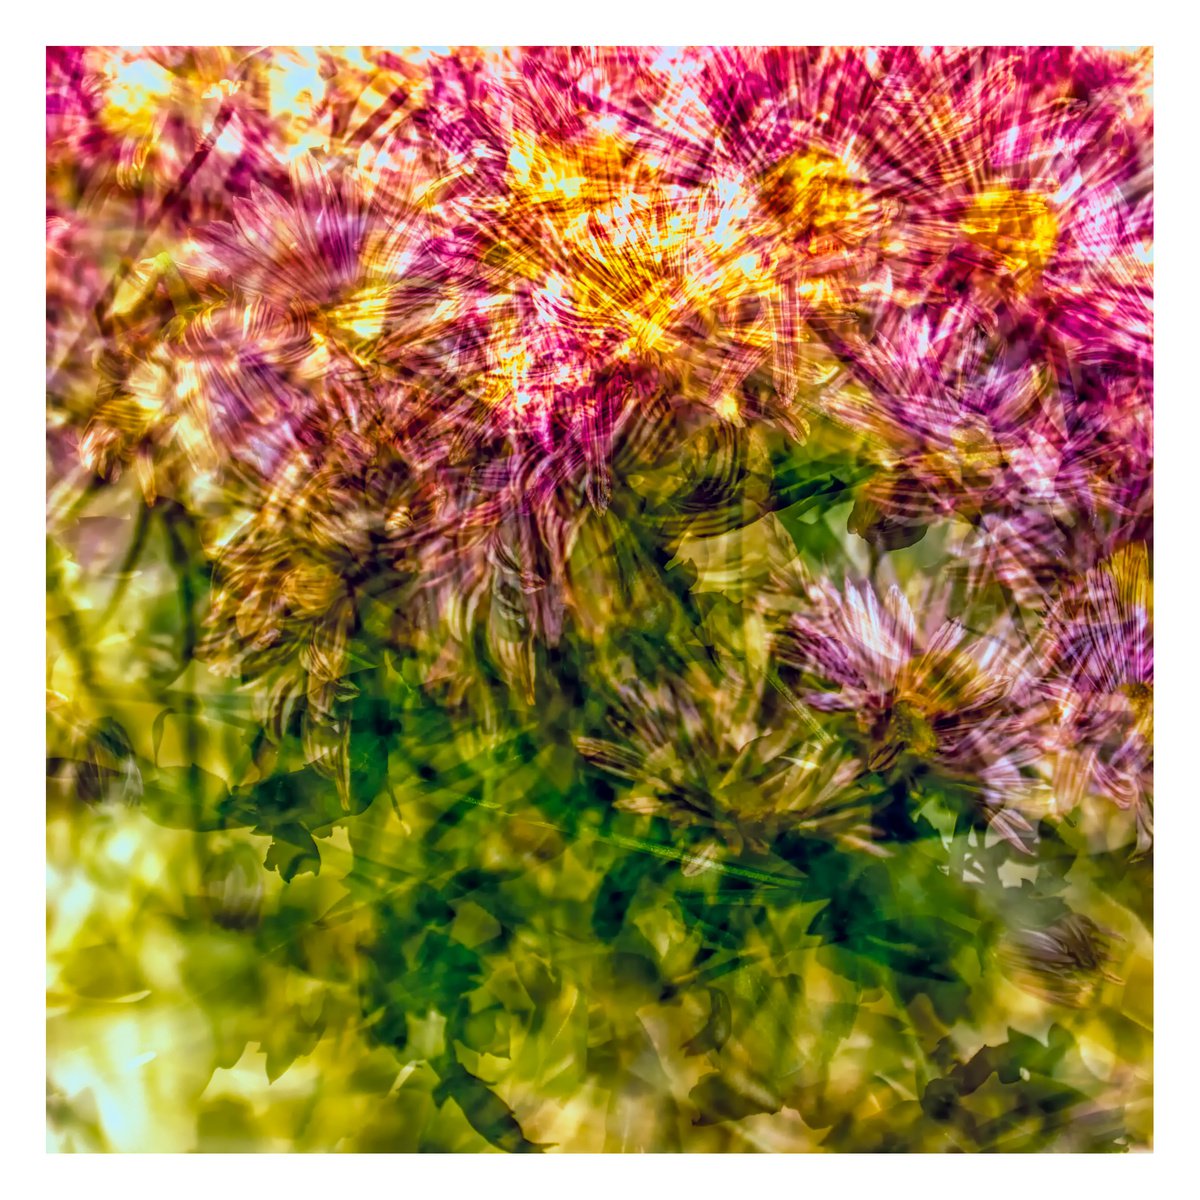 Abstract Flowers #7. Limited Edition 1/25 12x12 inch Photographic Print. by Graham Briggs